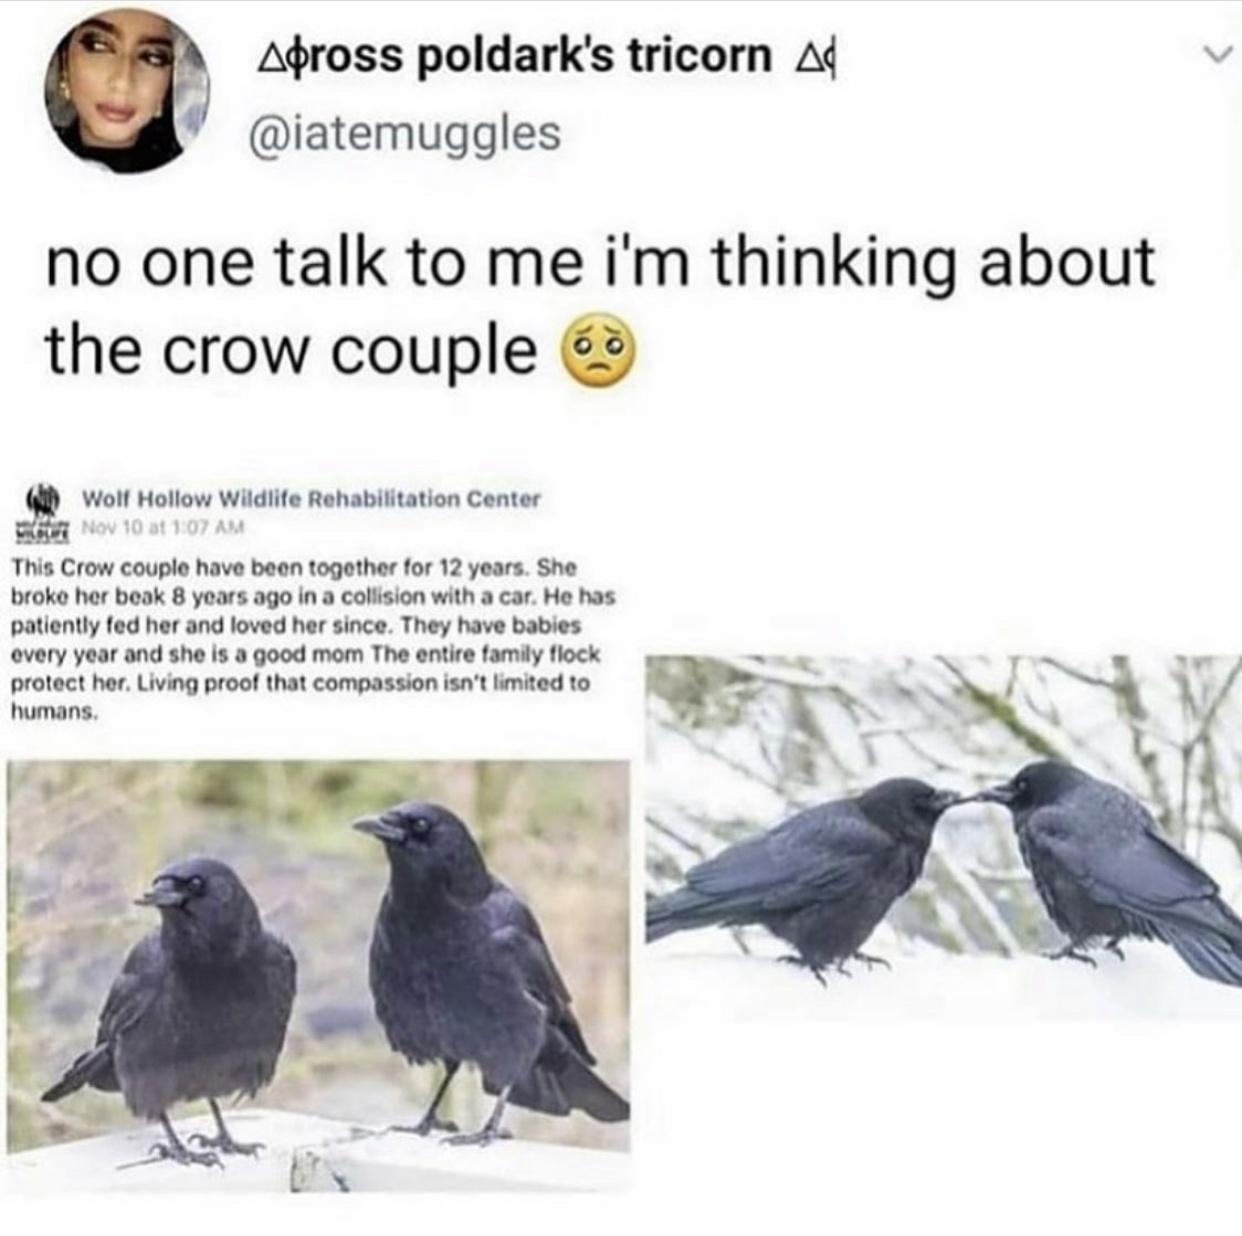 relationship-memes-wholesome crow memes - Apross poldark's tricorn Ad no one talk to me i'm thinking about the crow couple Wolf Hollow Wildlife Rehabilitation Center Nov 10 at This Crow couple have been together for 12 years. She broke her beak 8 years ag